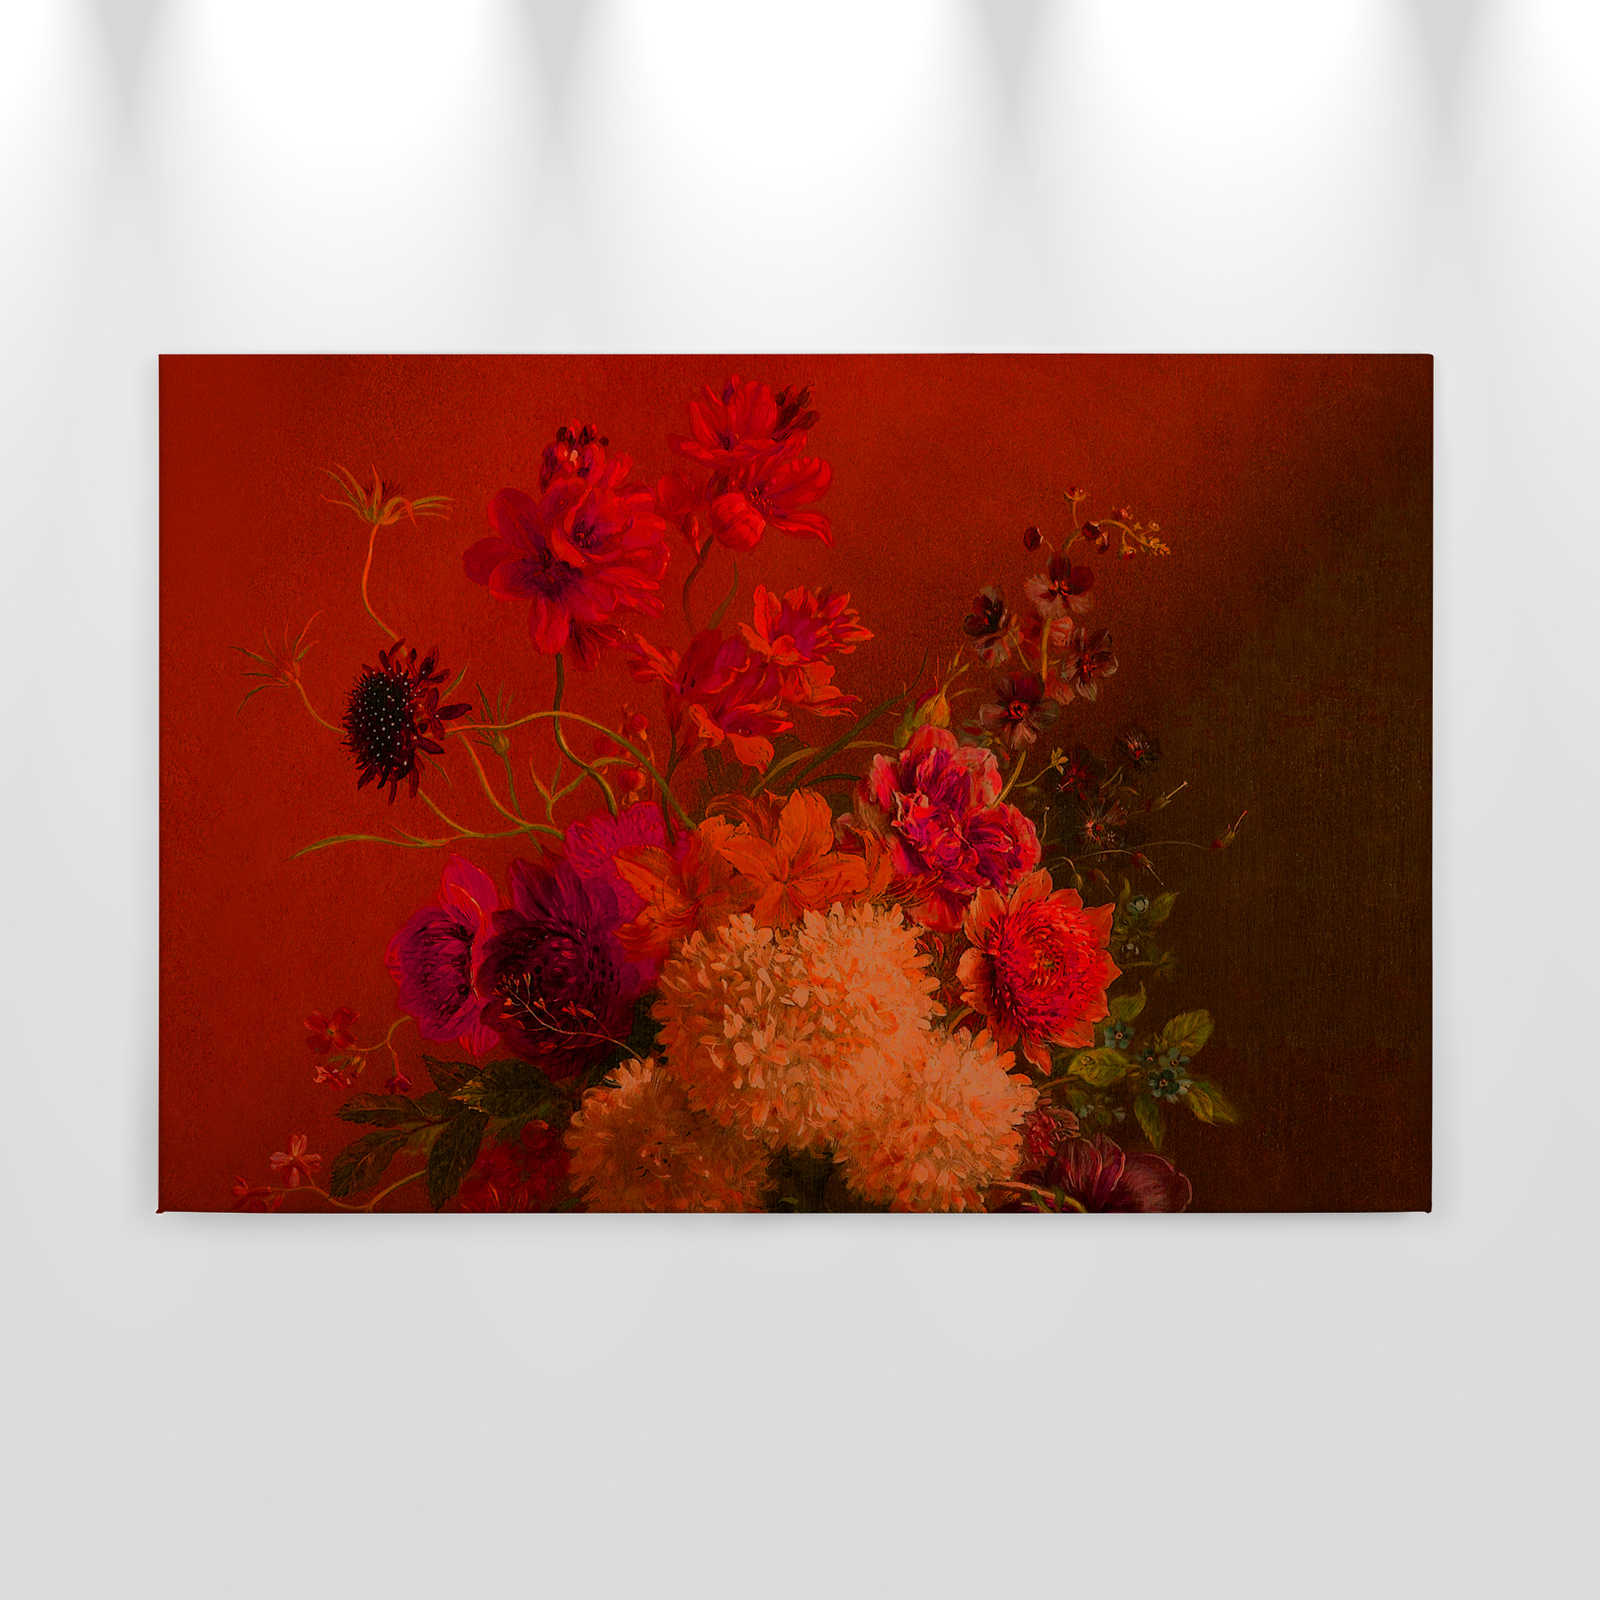             Neon Canvas Painting with Flowers Still Life | walls by patel - 0.90 m x 0.60 m
        